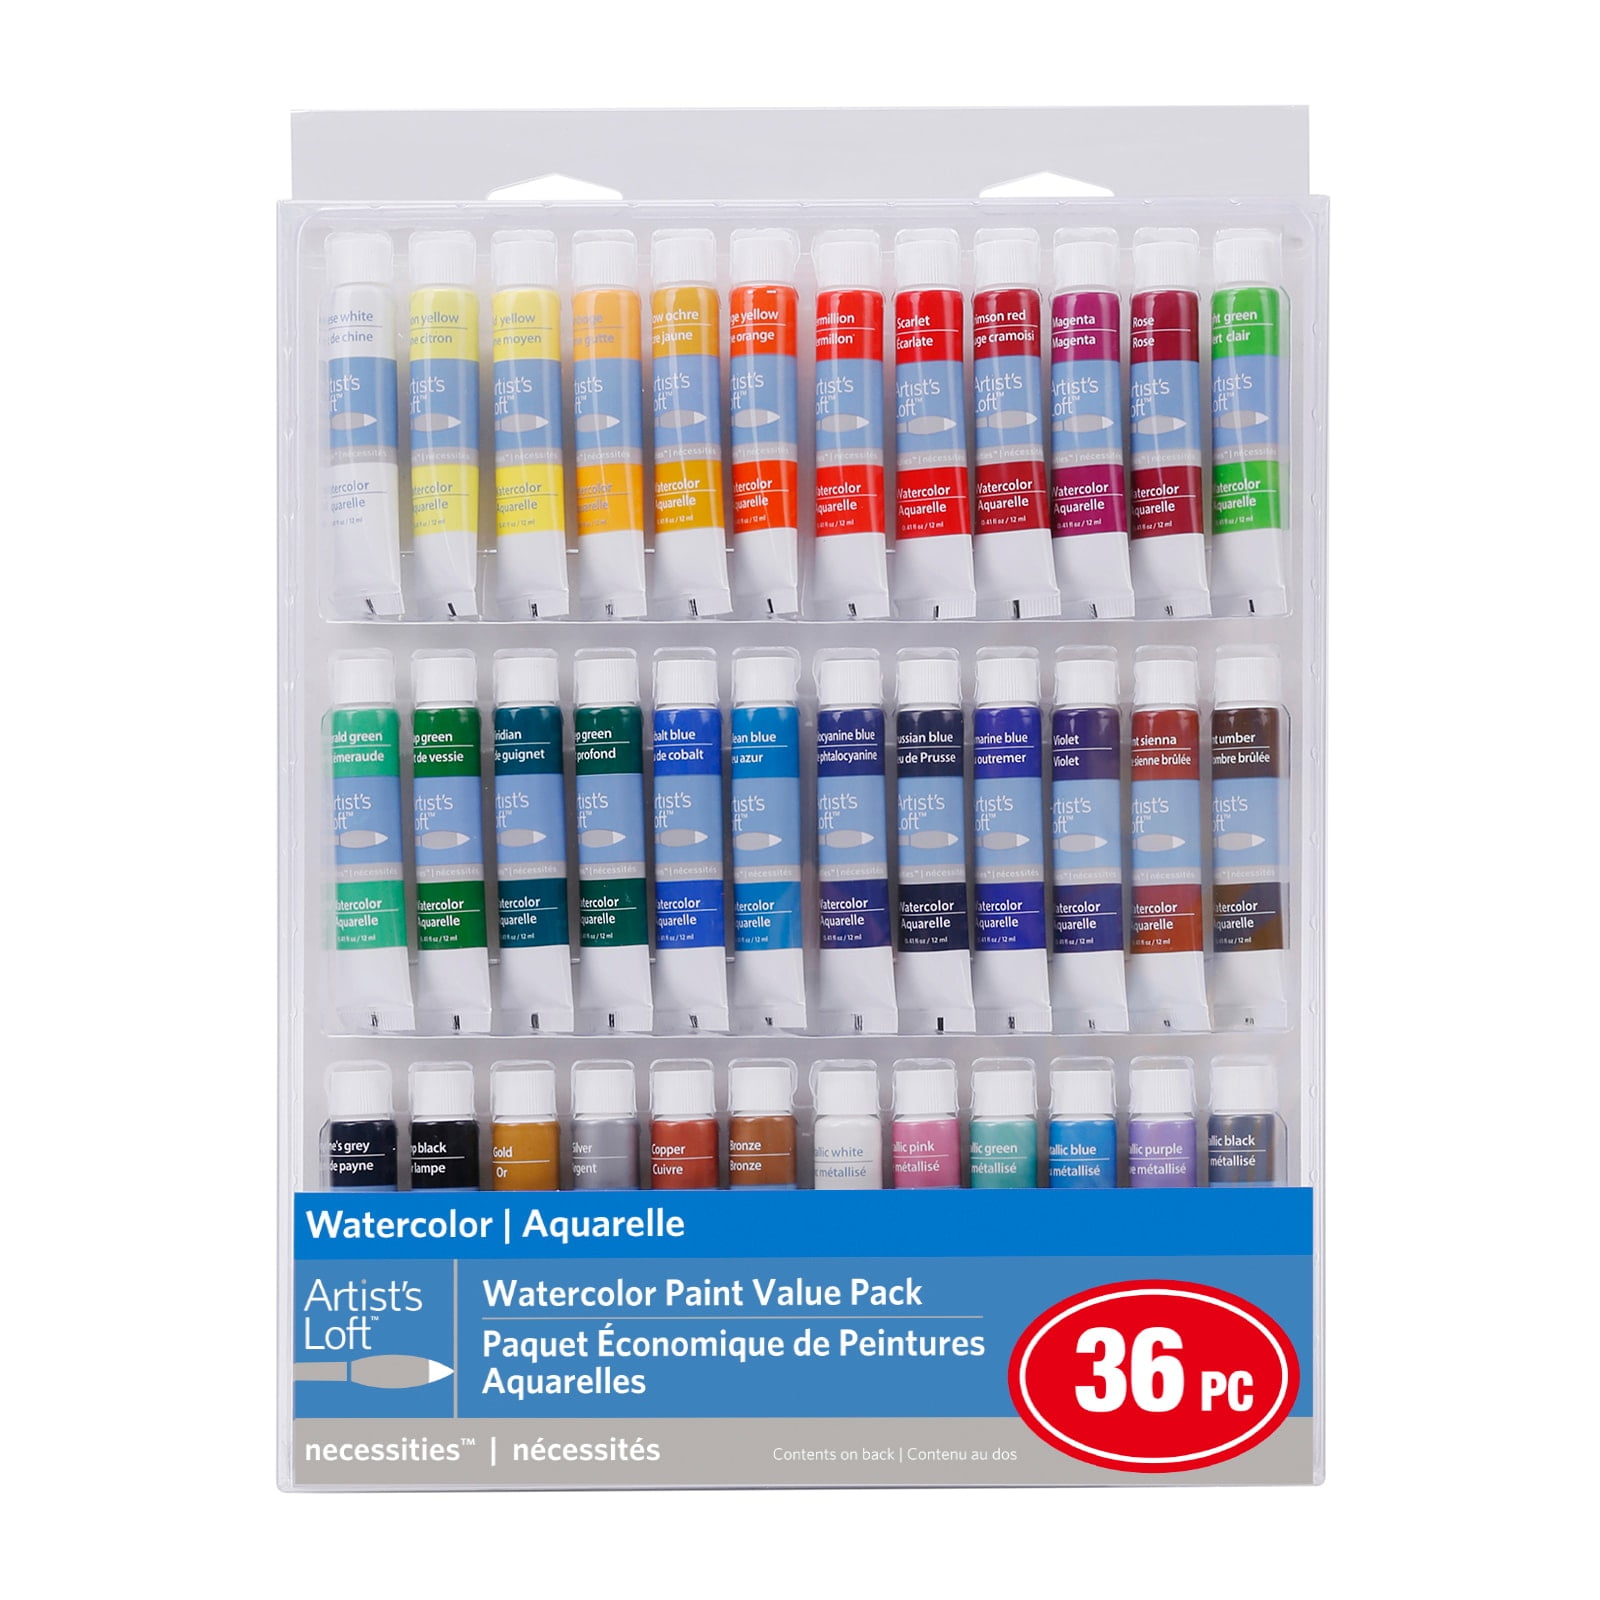 12 Packs: 36 ct. (432 total) Necessities™ Watercolor Paint Value Pack by Artist's Loft™